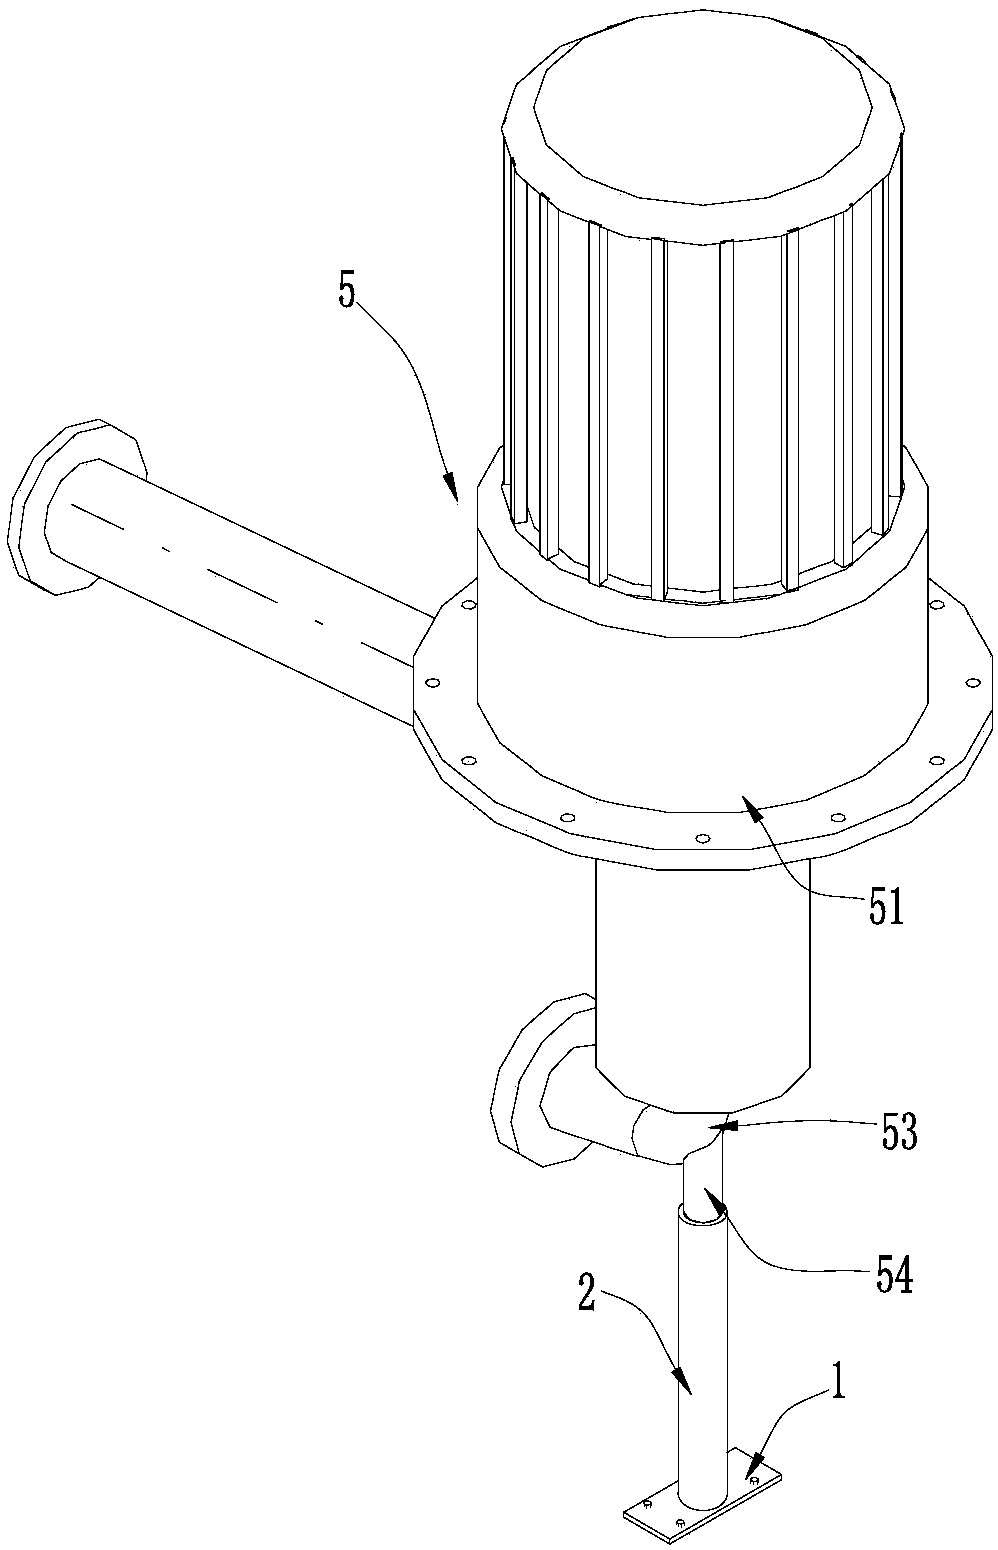 Guide bracket as well as guide structure of pump body of vertical type high-pressure centrifugal pump